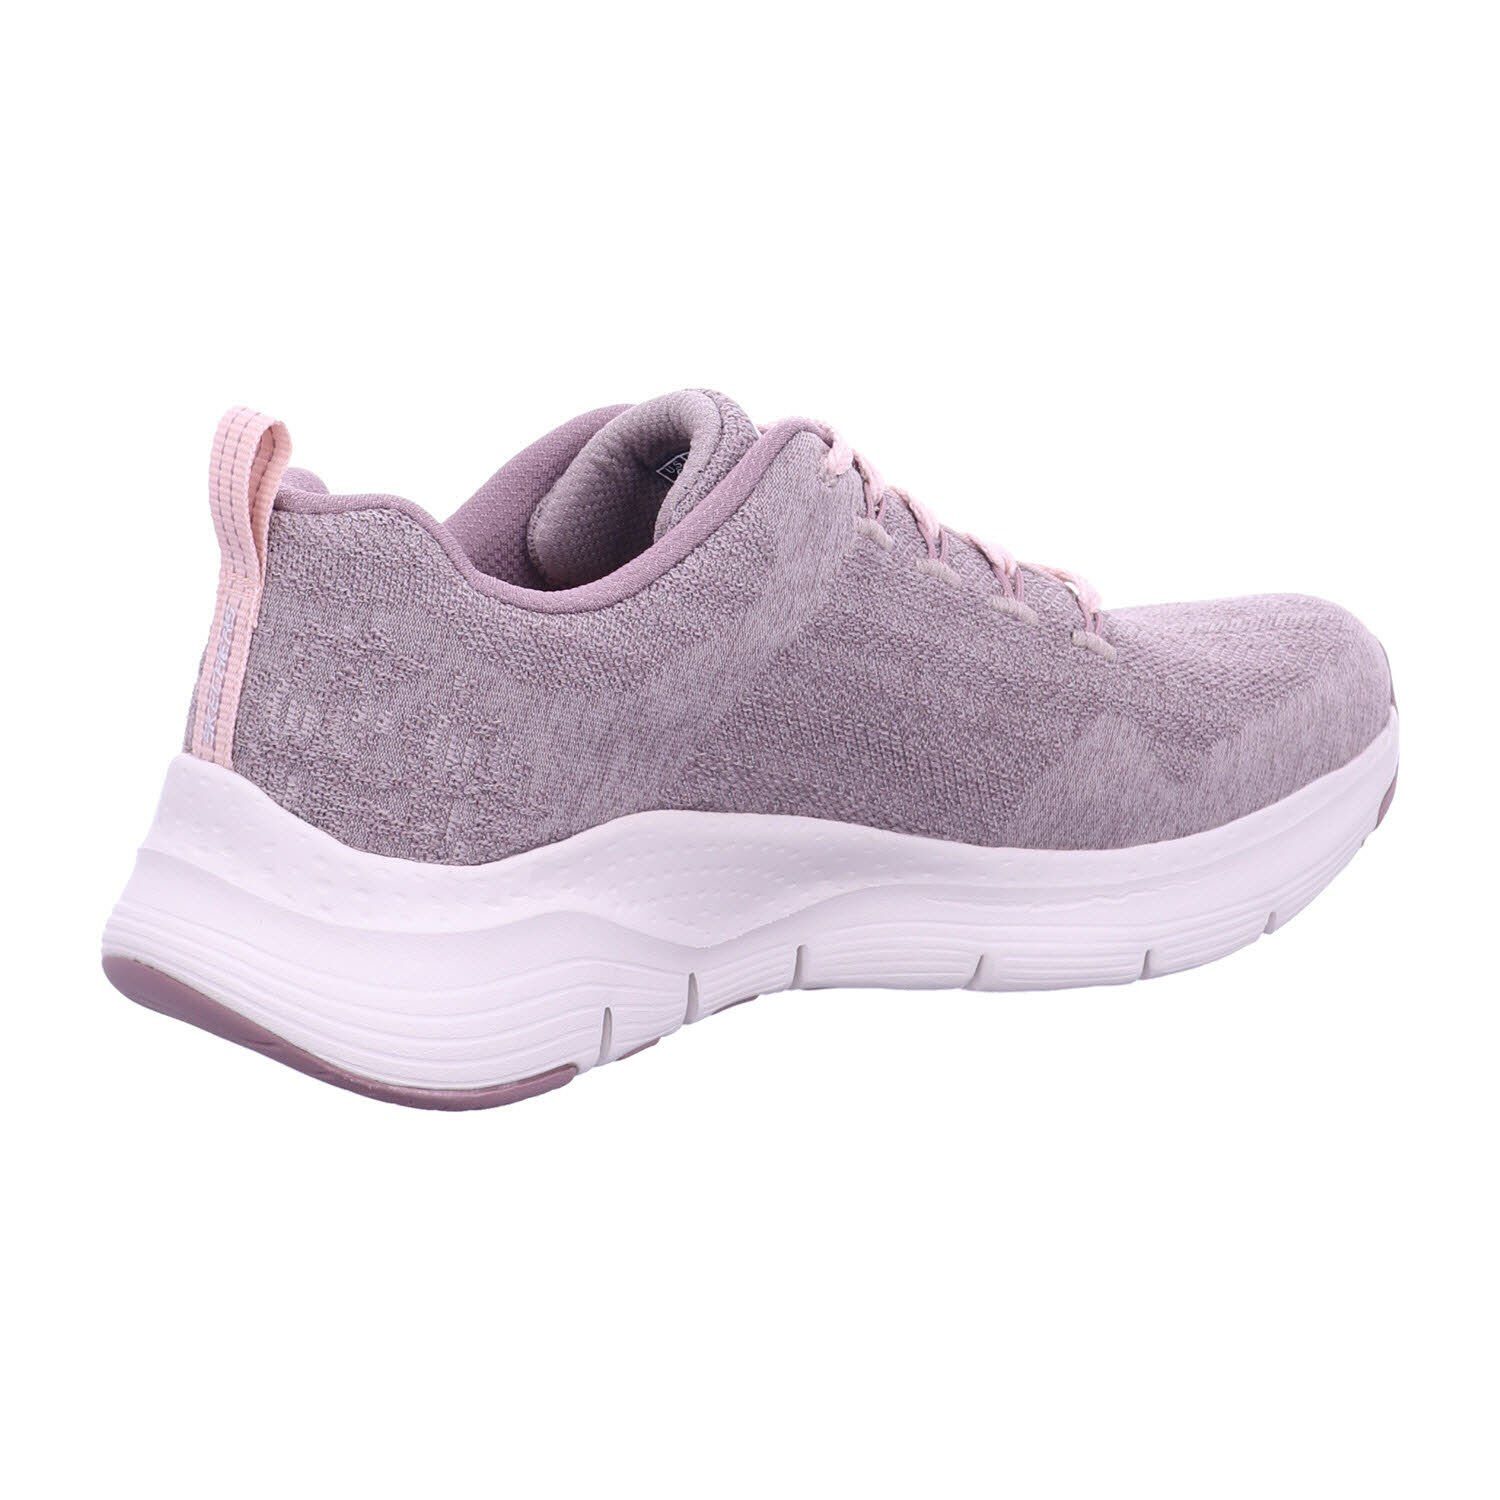 COMFY dark WAVE - Skechers (2-tlg) taupe FIT Sneaker ARCH